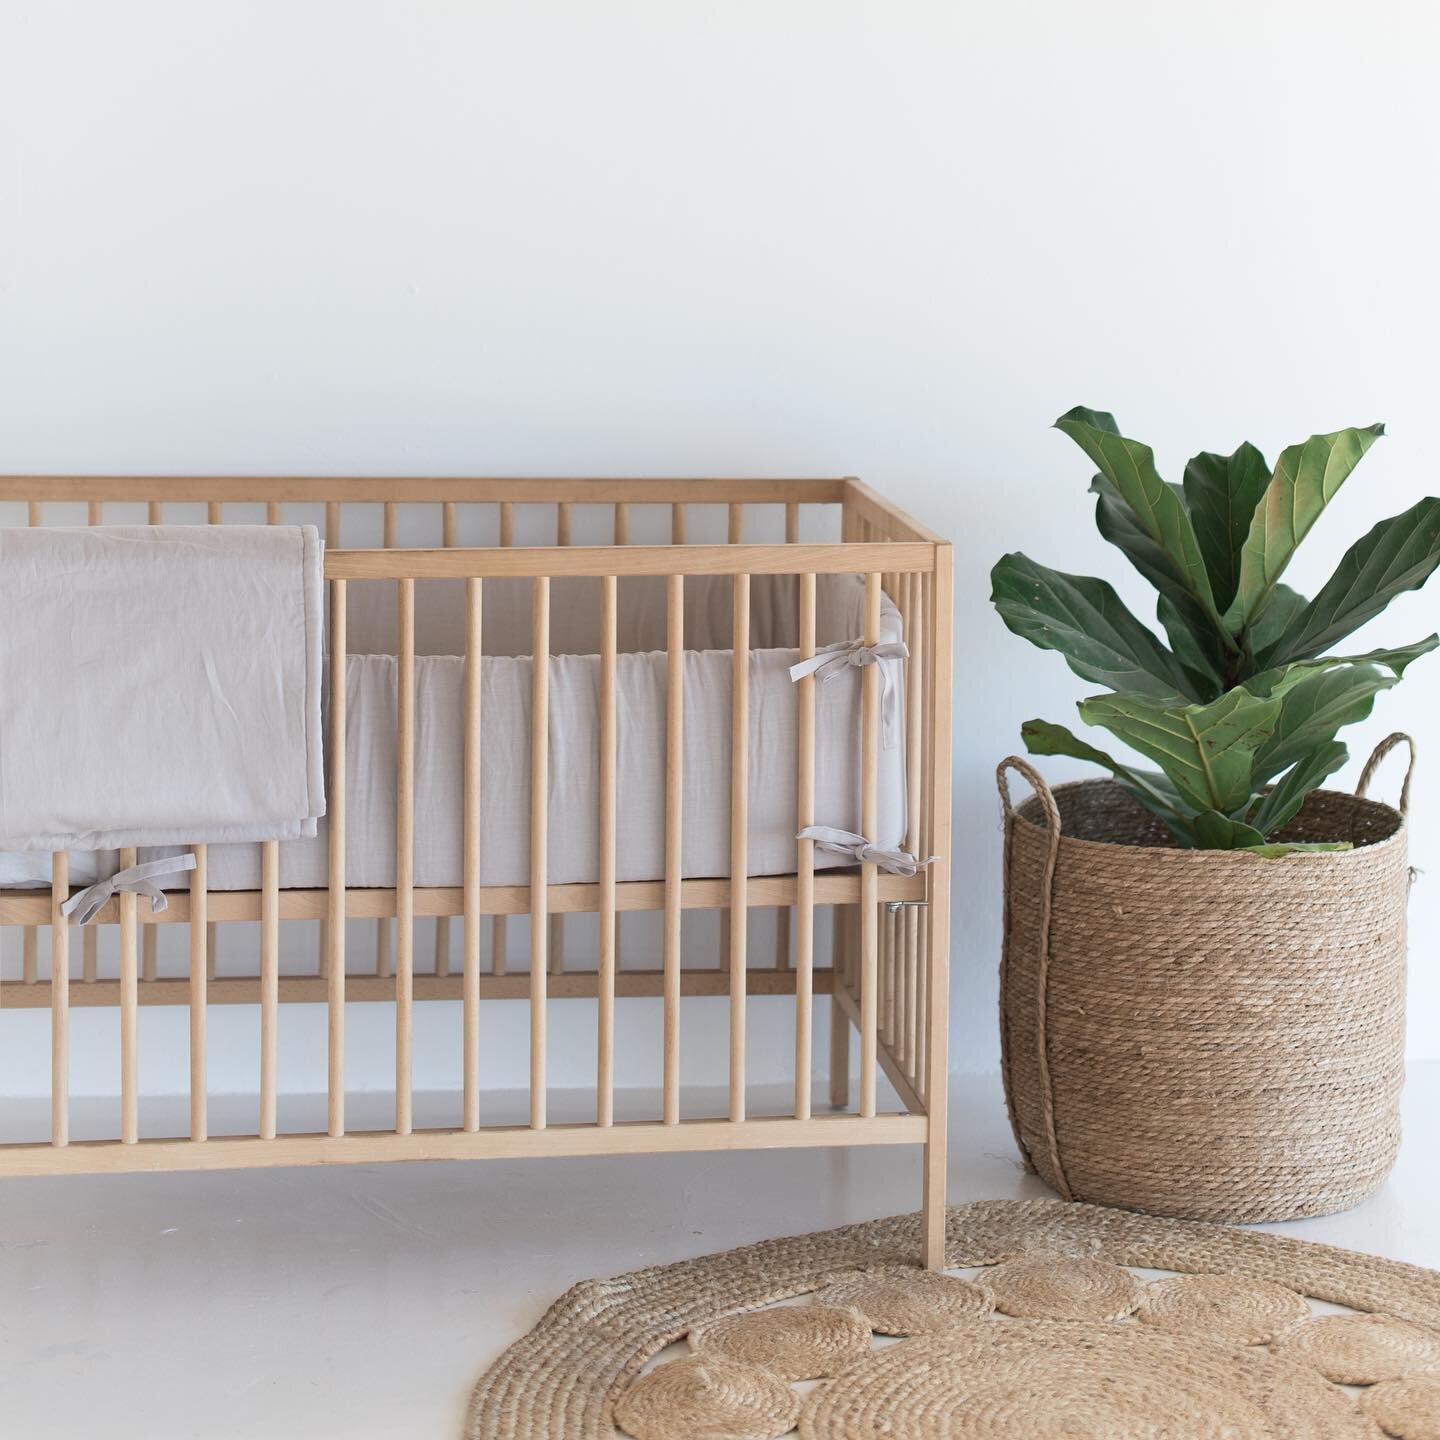 Sometimes, less is more. Keep your baby's nursery decor simple, elegant, and timeless with our pure linen baby essentials.

#incababylinen #babylinen #purelinen #babyessentials #nurserydecor #decor #proudlysouthafrican